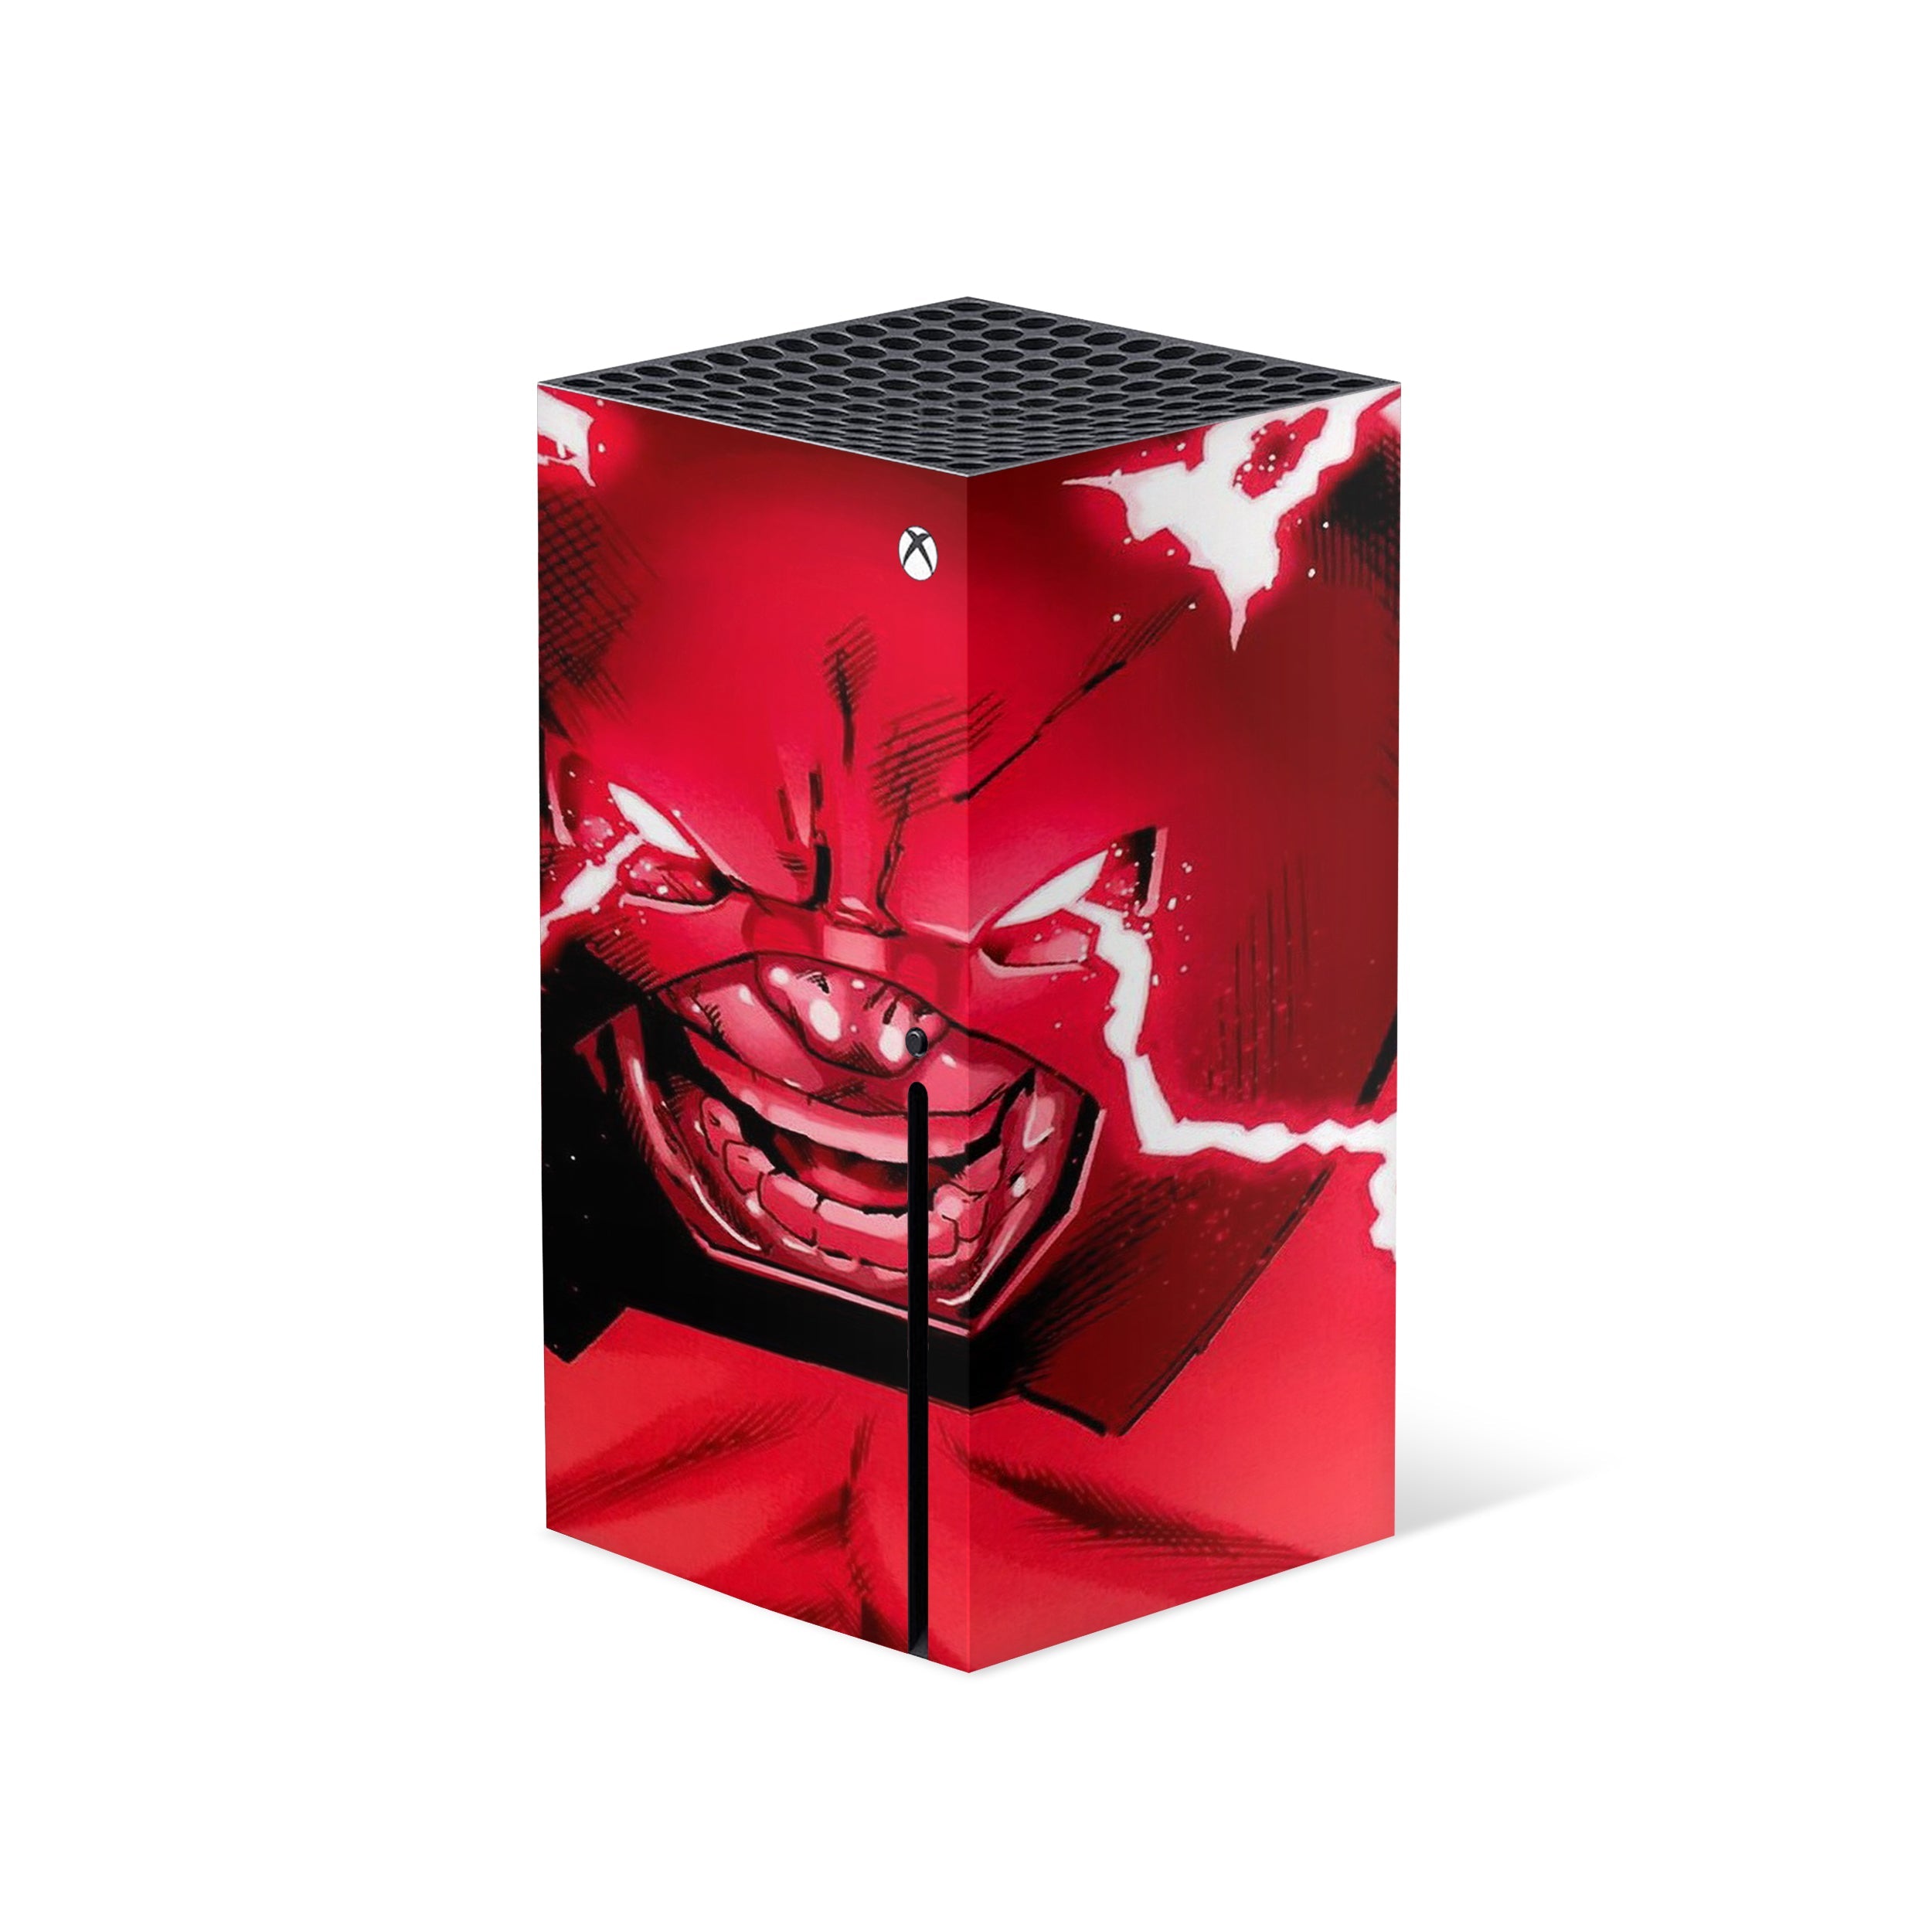 A video game skin featuring a Marvel Comics X Men Juggernaut design for the Xbox Series X.